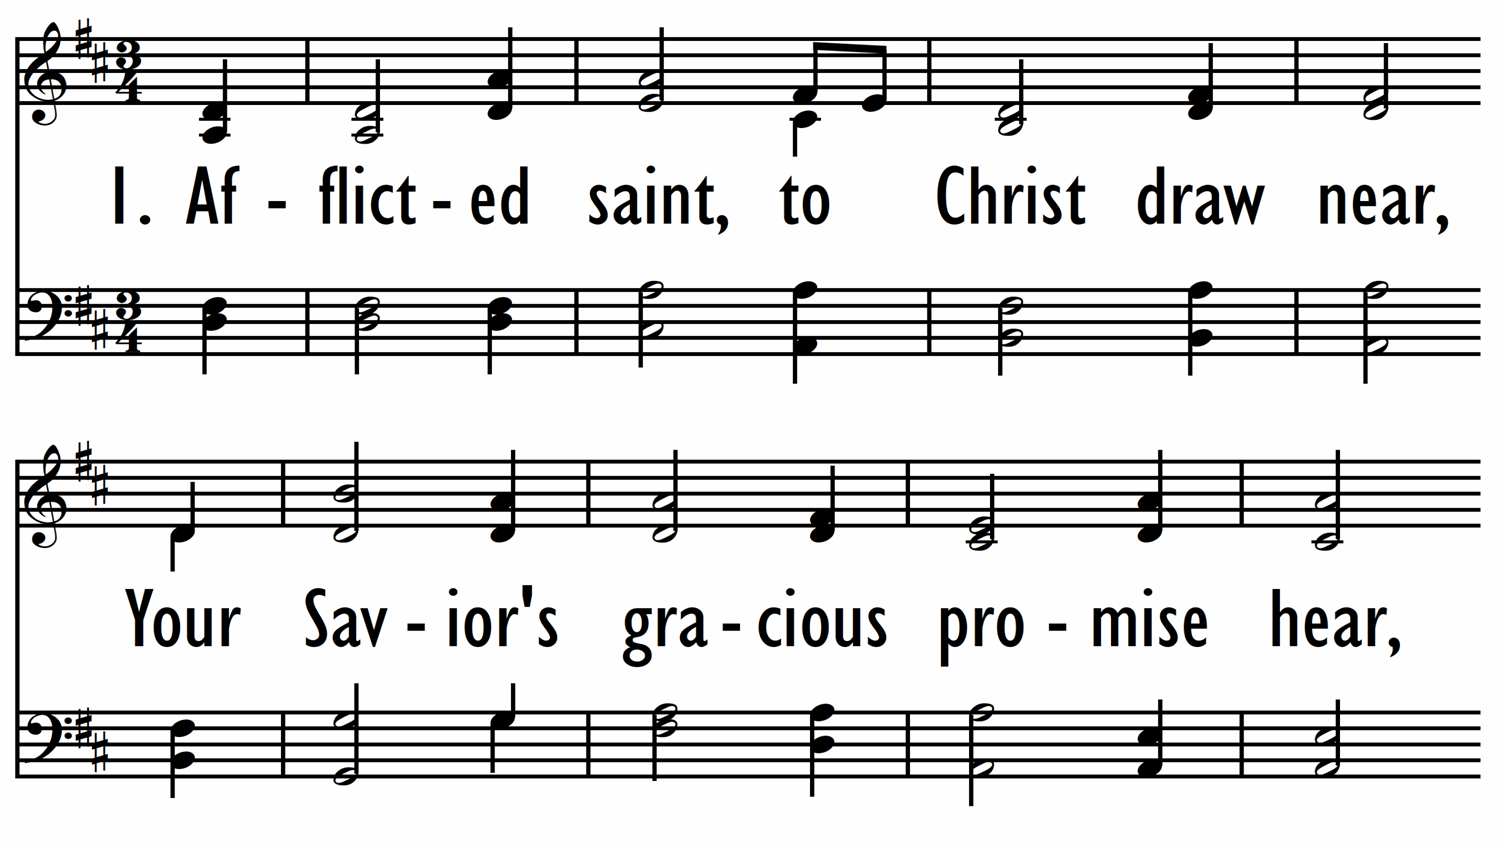 AFFLICTED SAINT, TO CHRIST DRAW NEAR Digital Songs & Hymns